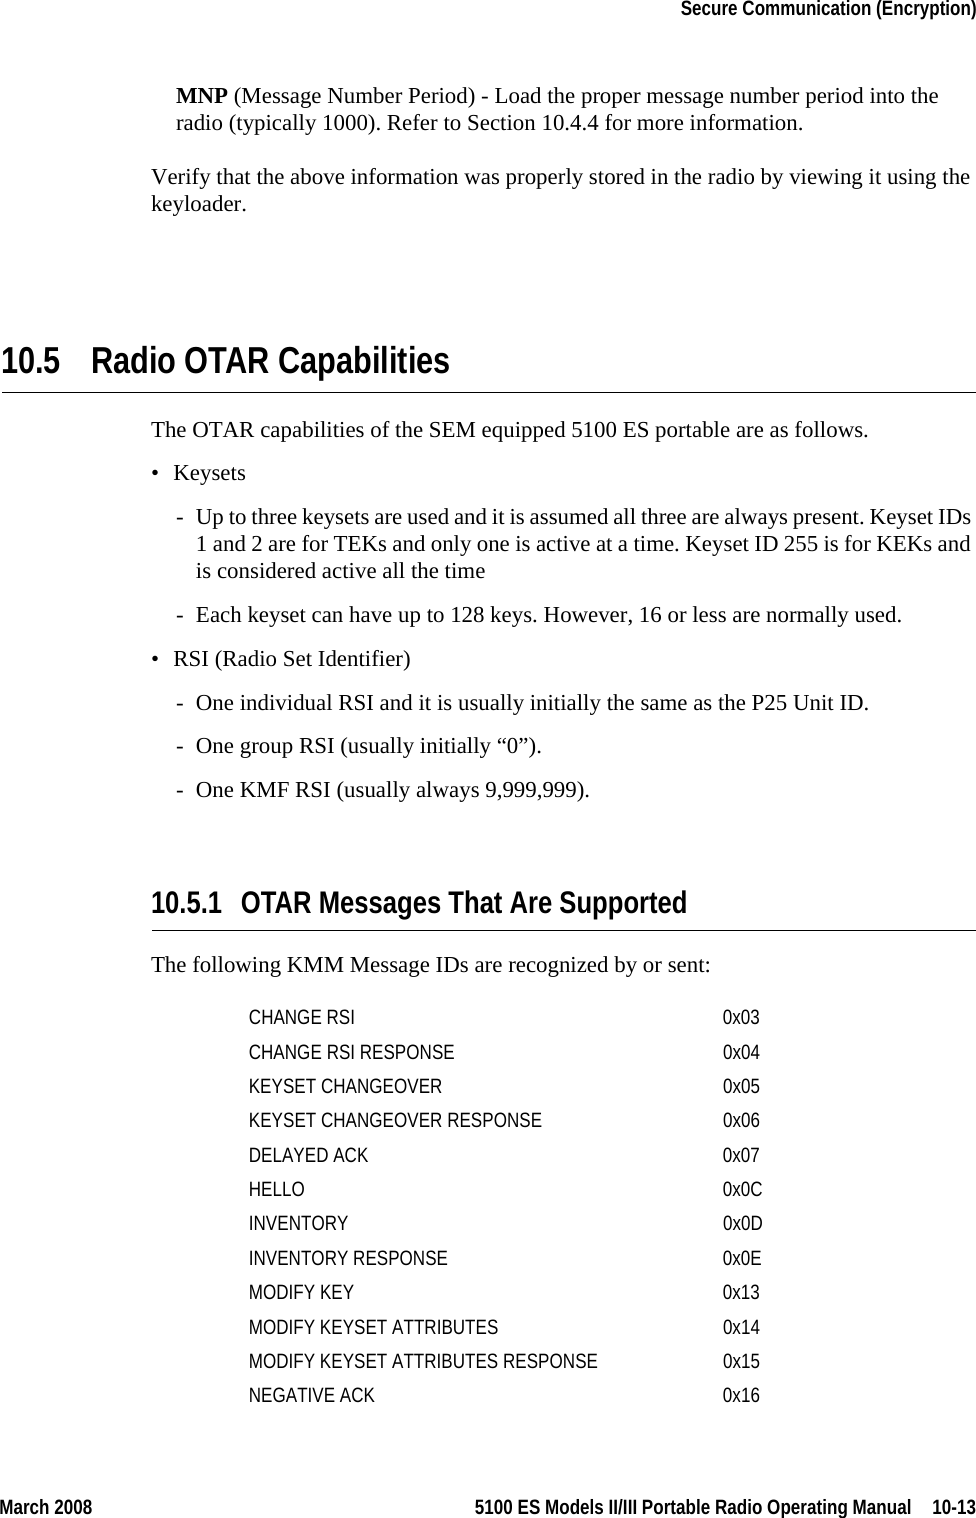 March 2008 5100 ES Models II/III Portable Radio Operating Manual  10-13Secure Communication (Encryption)MNP (Message Number Period) - Load the proper message number period into the radio (typically 1000). Refer to Section 10.4.4 for more information.Verify that the above information was properly stored in the radio by viewing it using the keyloader.10.5 Radio OTAR CapabilitiesThe OTAR capabilities of the SEM equipped 5100 ES portable are as follows. • Keysets- Up to three keysets are used and it is assumed all three are always present. Keyset IDs 1 and 2 are for TEKs and only one is active at a time. Keyset ID 255 is for KEKs and is considered active all the time- Each keyset can have up to 128 keys. However, 16 or less are normally used.• RSI (Radio Set Identifier)- One individual RSI and it is usually initially the same as the P25 Unit ID.- One group RSI (usually initially “0”).- One KMF RSI (usually always 9,999,999).10.5.1 OTAR Messages That Are SupportedThe following KMM Message IDs are recognized by or sent: CHANGE RSI 0x03CHANGE RSI RESPONSE 0x04KEYSET CHANGEOVER 0x05KEYSET CHANGEOVER RESPONSE 0x06DELAYED ACK 0x07HELLO 0x0CINVENTORY 0x0DINVENTORY RESPONSE 0x0EMODIFY KEY 0x13MODIFY KEYSET ATTRIBUTES 0x14MODIFY KEYSET ATTRIBUTES RESPONSE 0x15NEGATIVE ACK 0x16